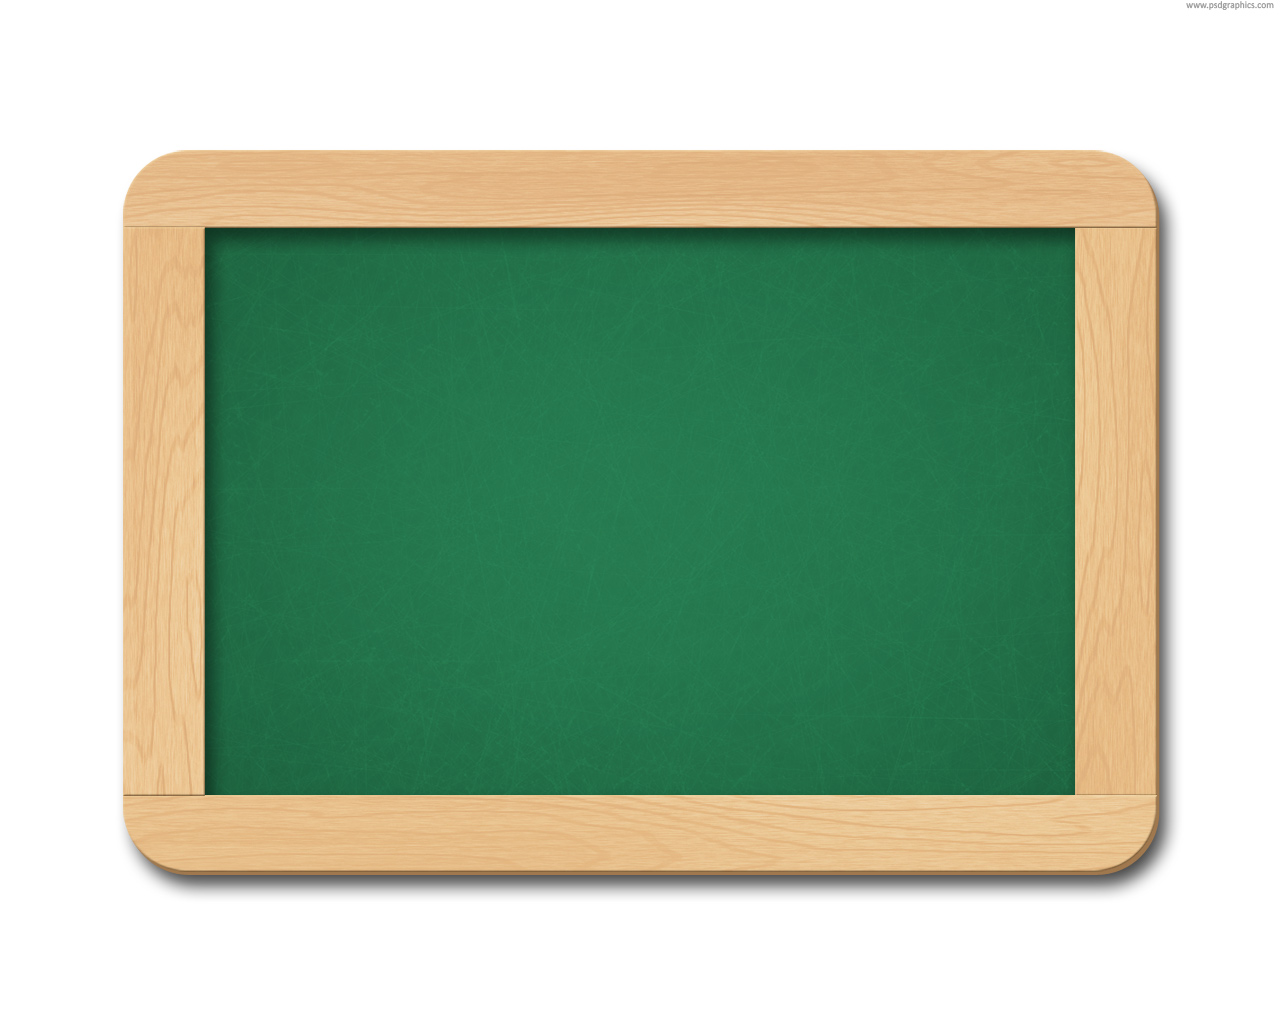 chalkboard clipart download free - photo #30